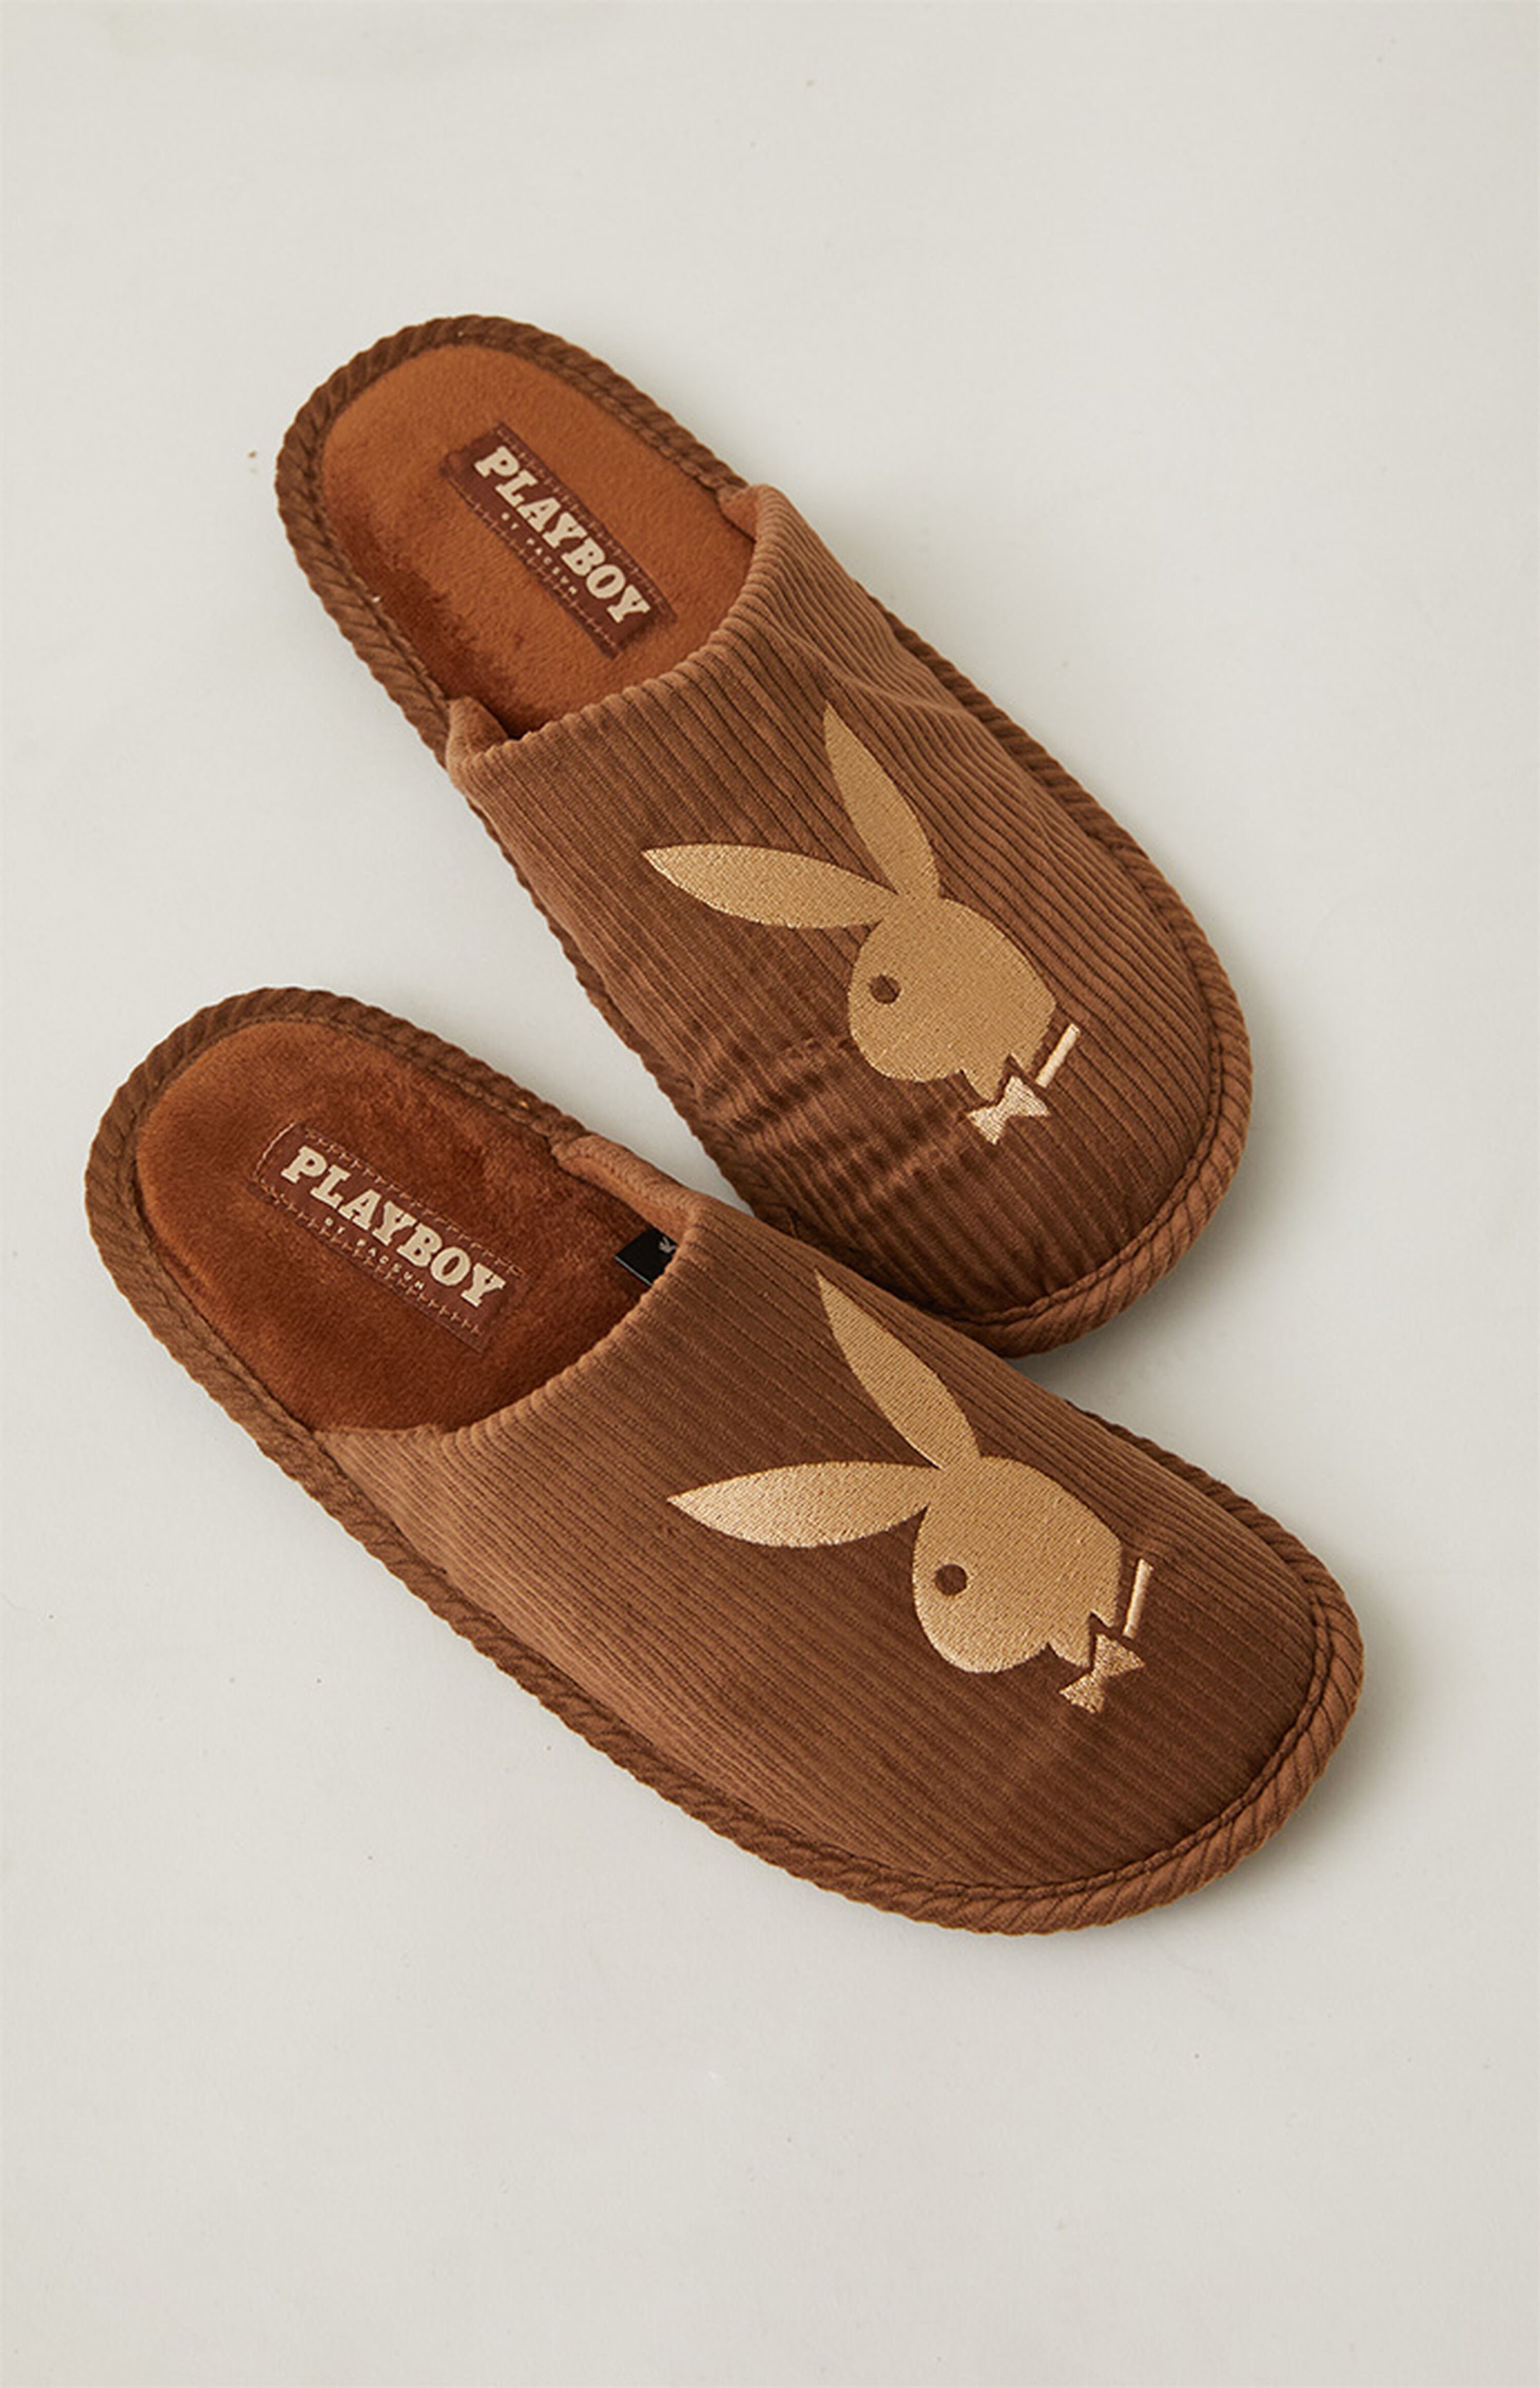 Playboy By PacSun Corduroy Bunny Slippers Mens - XLG (11/12), XXL (13) - $6.62 w/ Free Shipping @ PacSun